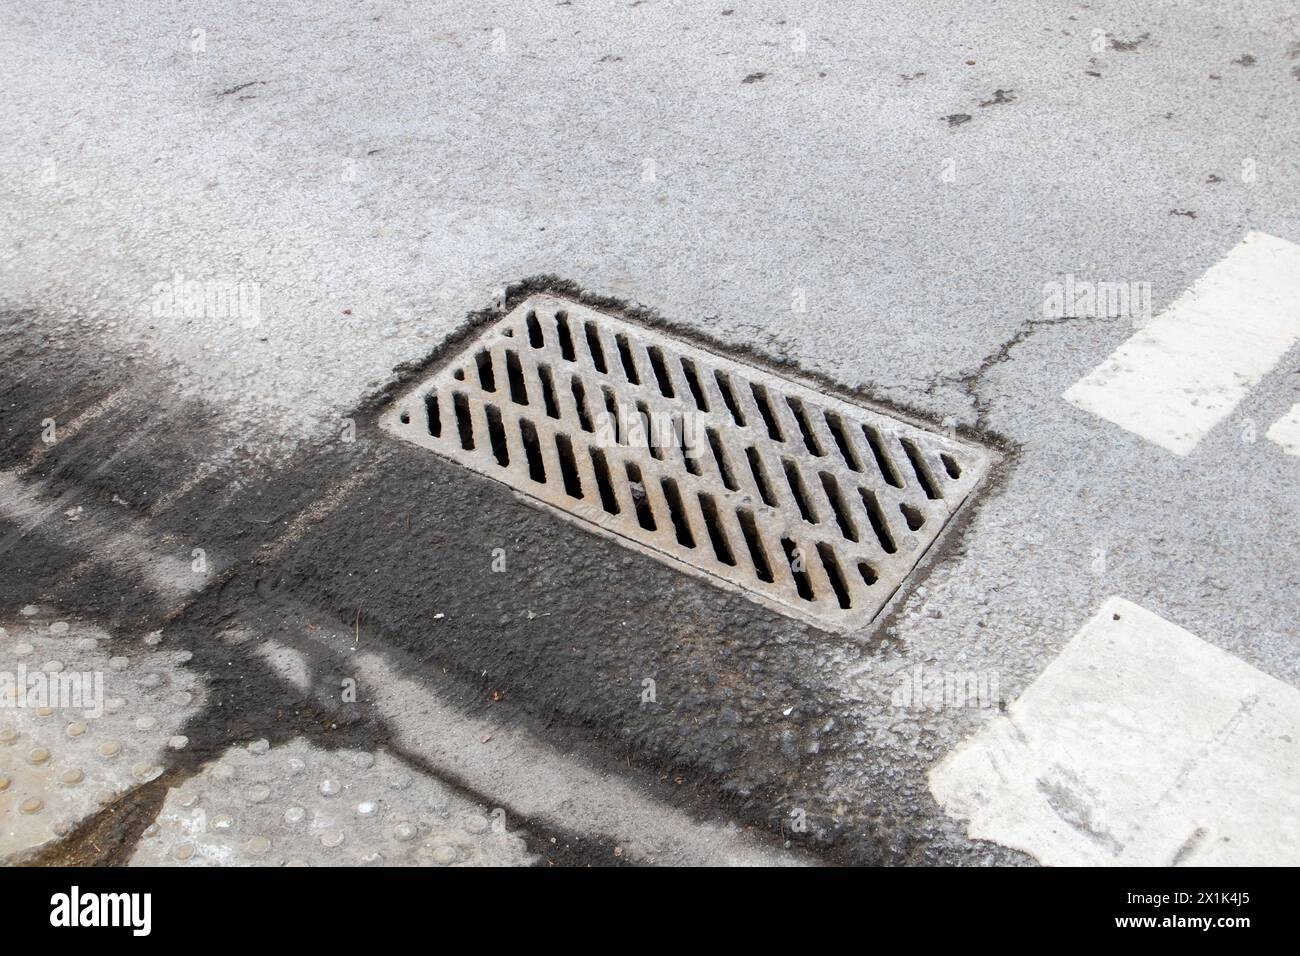 A grey, rectangular manhole cover is resting on the asphalt road surface near a storm drain, possibly covering a sanitary sewer or gas line Stock Photo